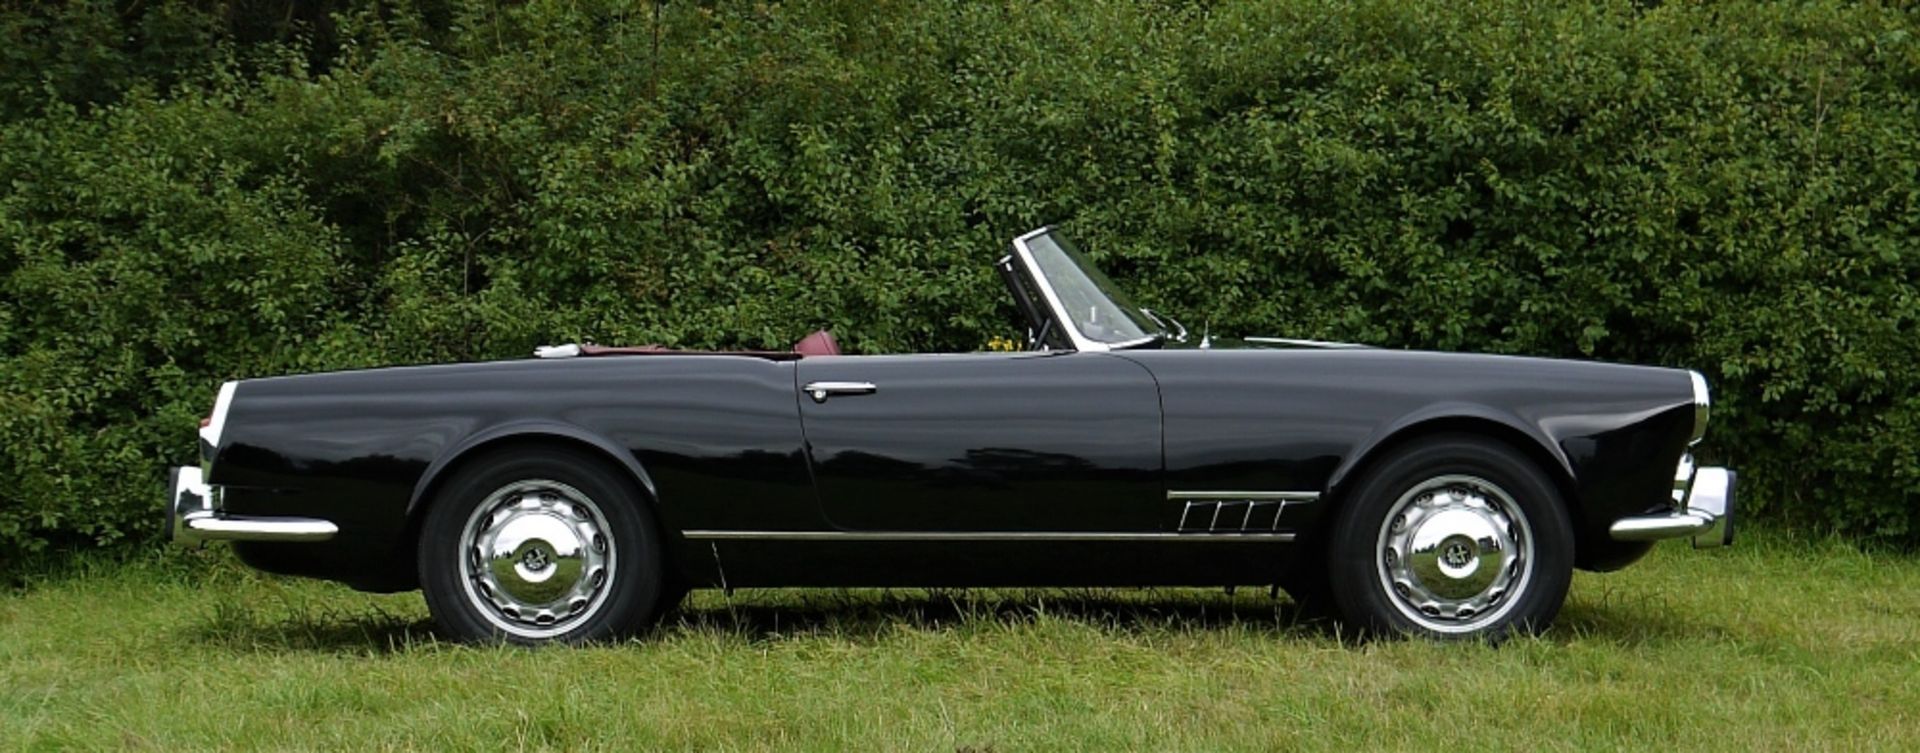 1960 ALFA ROMEO TOURING SPIDER Registration Number: 307 XVJ Chassis Number: AR*10204*000517 Recorded - Image 5 of 36